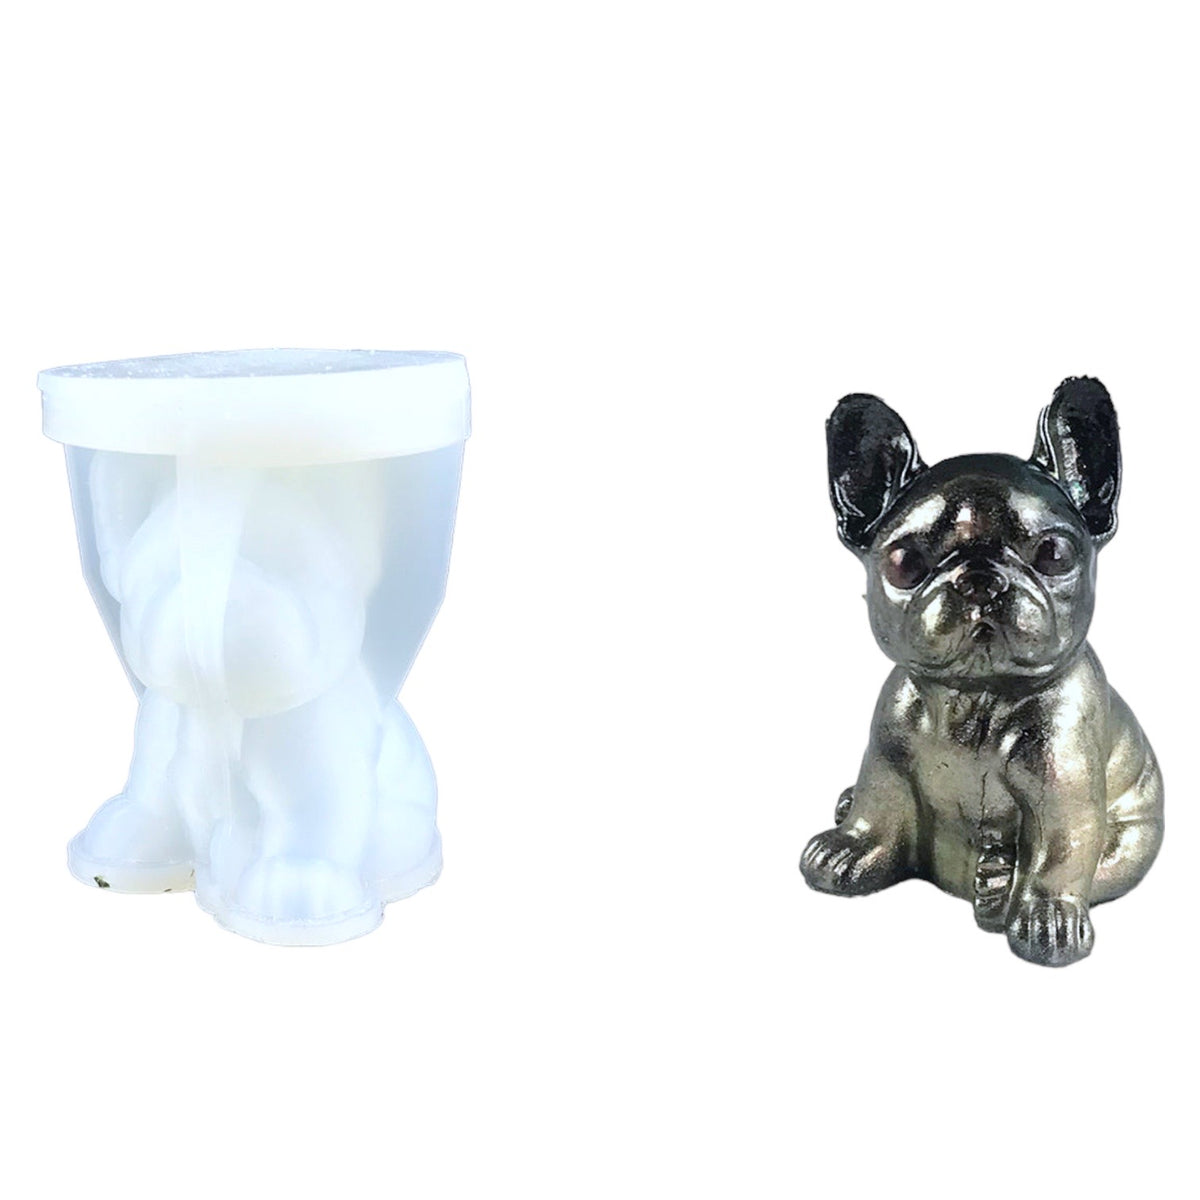 3D French Bulldog Mold for UV and Epoxy Resin Art